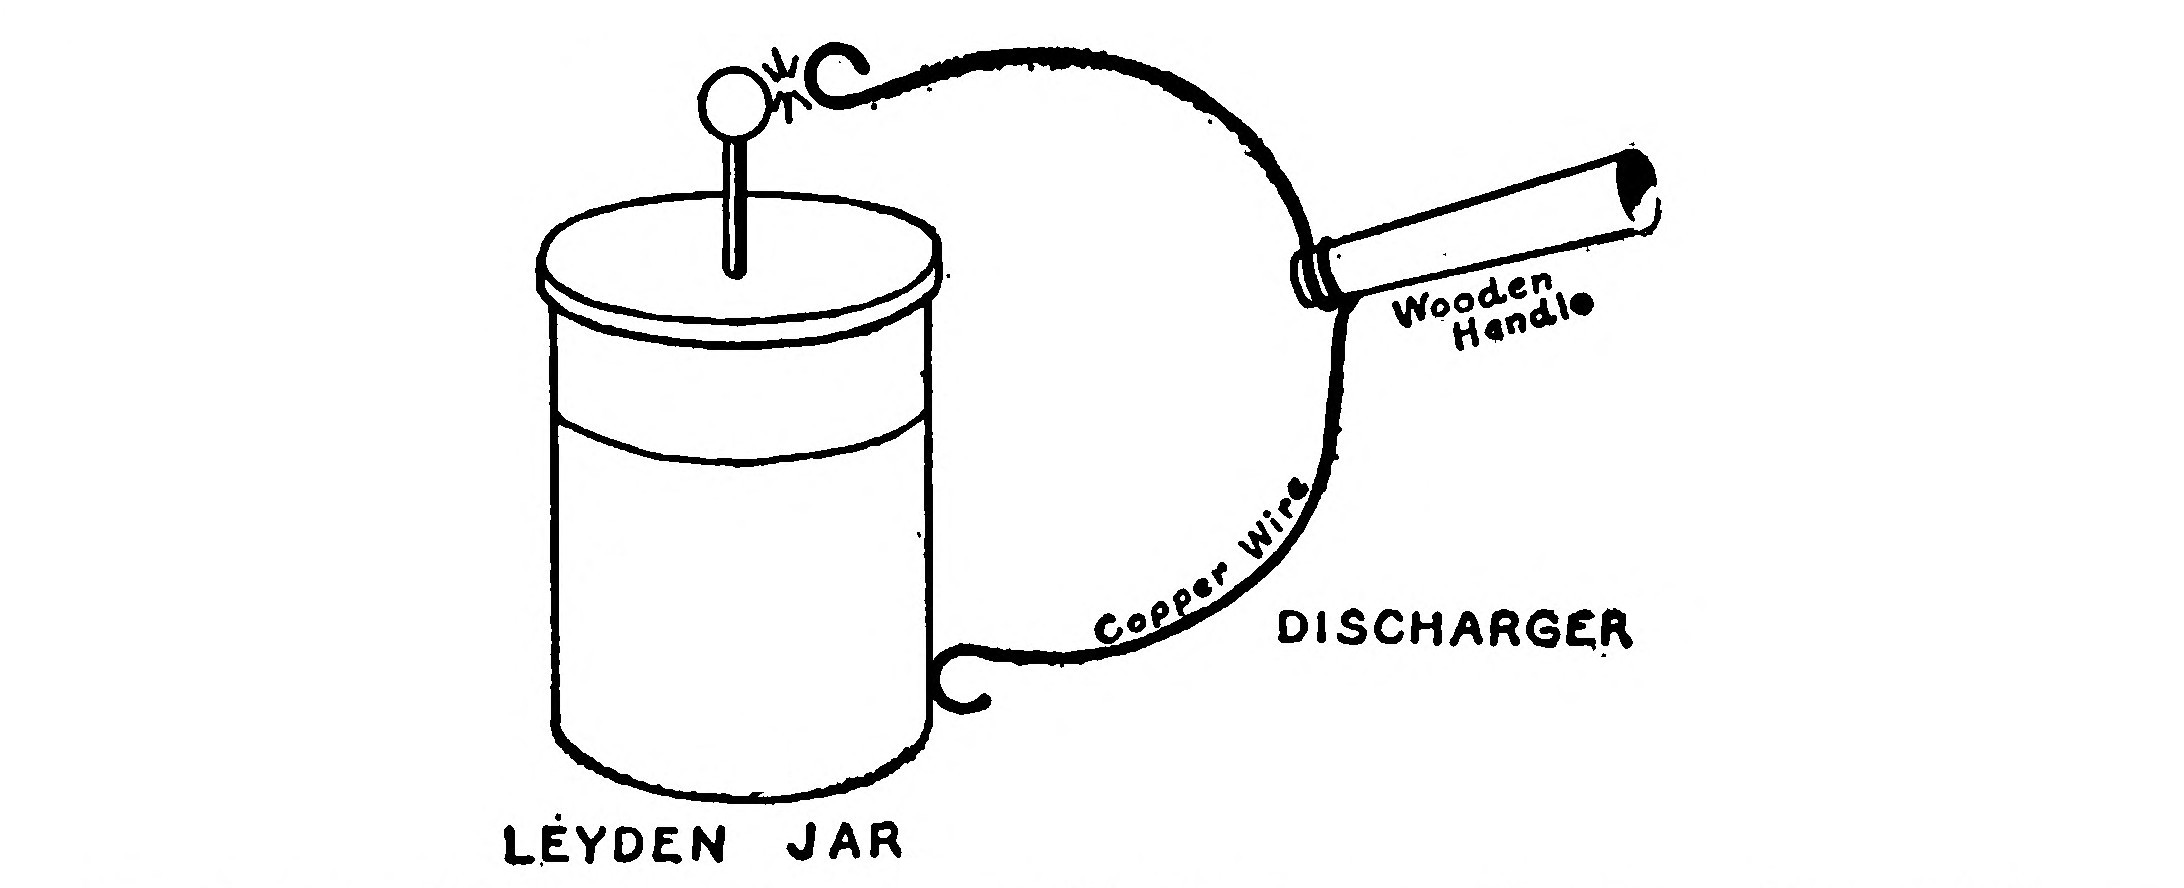 FIG. 17.—Showing how to Discharge a Leyden Jar with a curved piece of stiff wire fitted to a Wooden Handle.